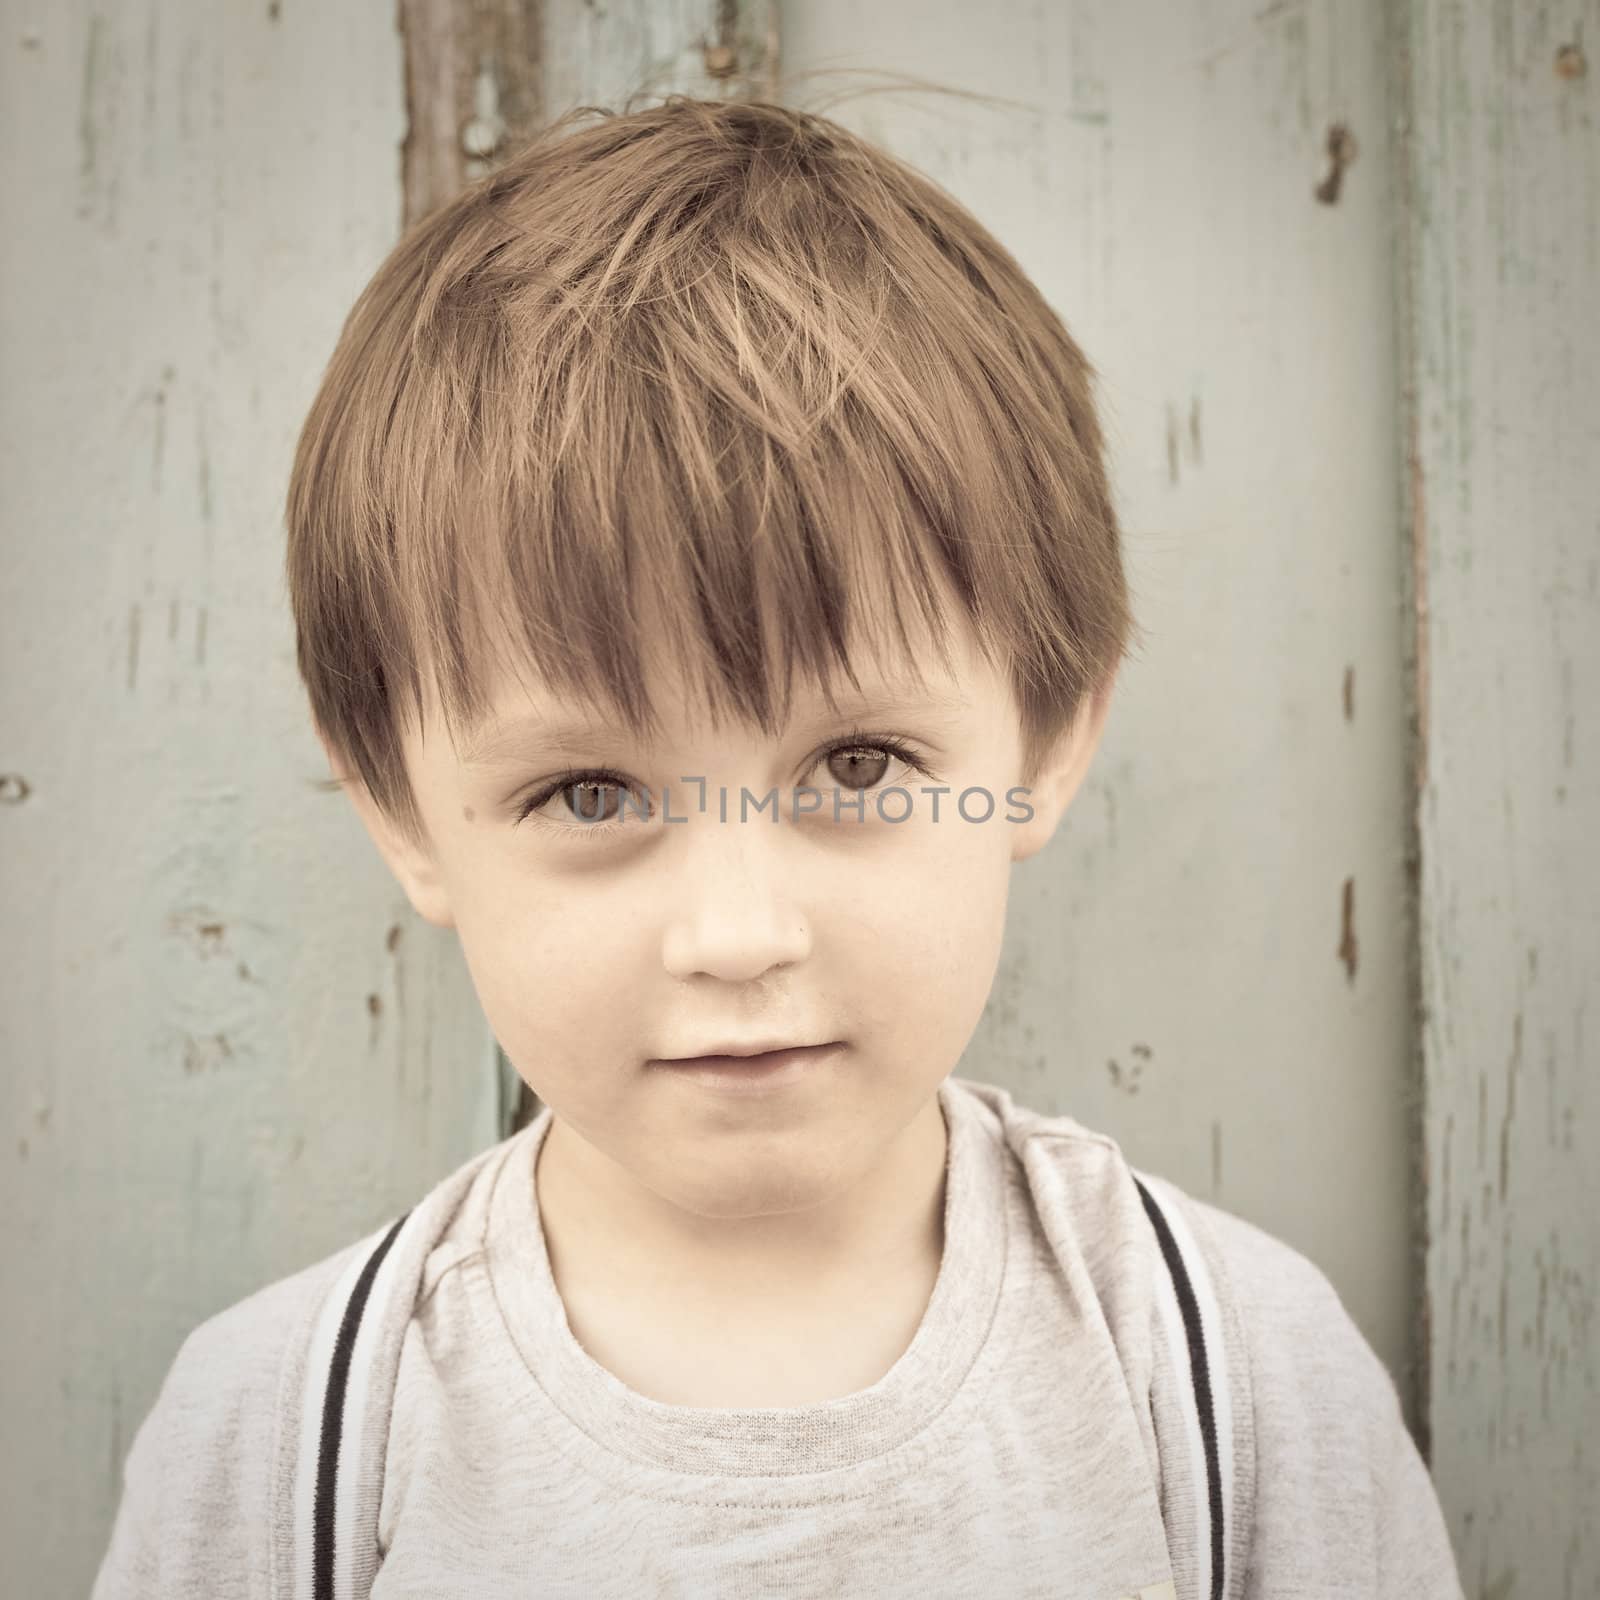 Adorable three year old boy in sepia tones